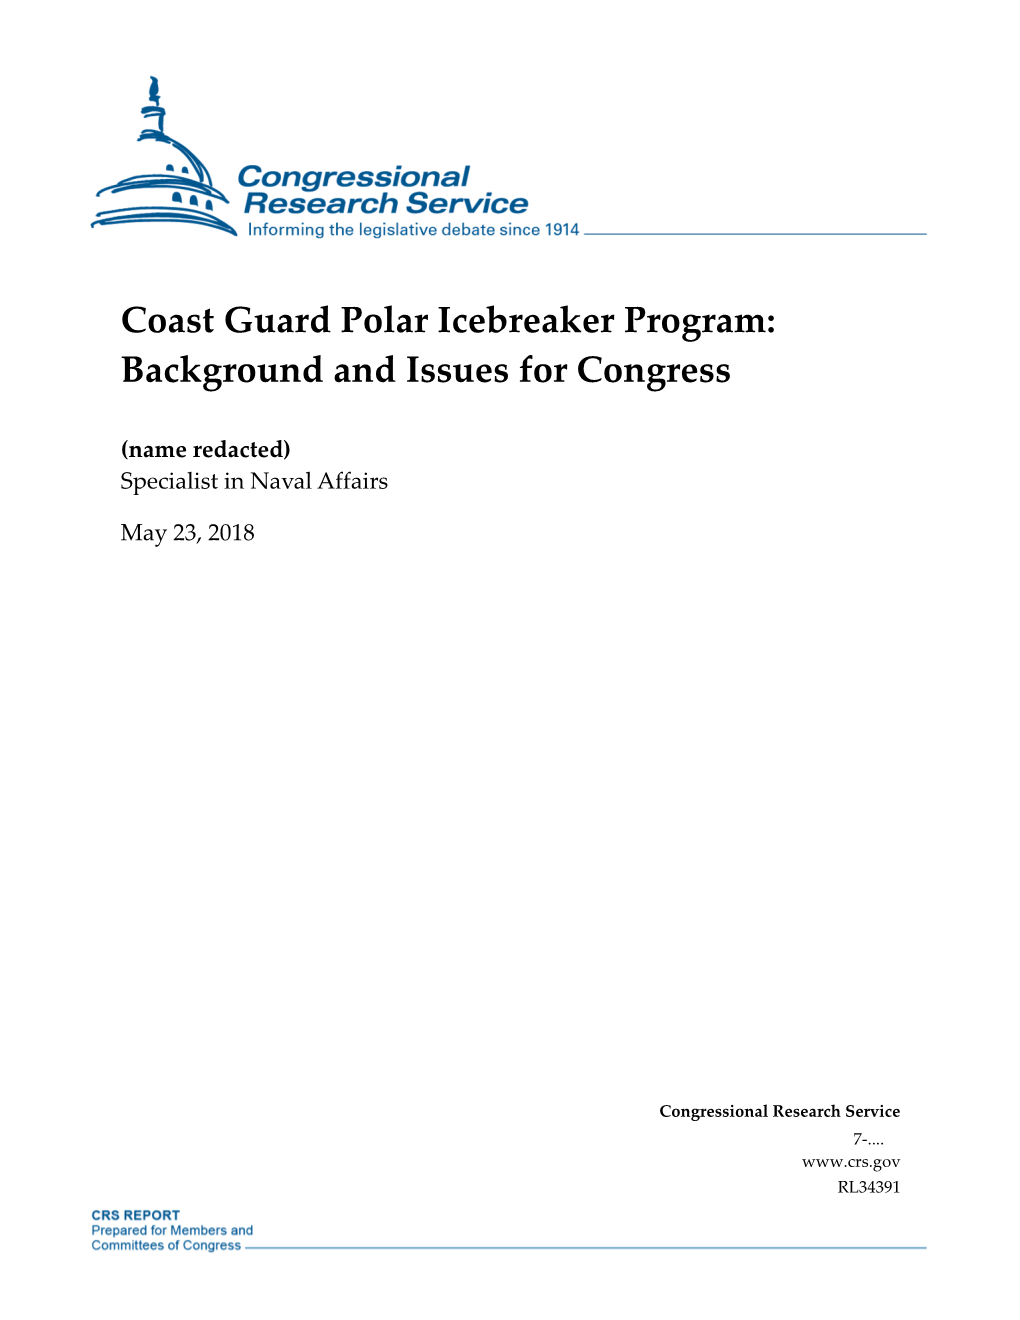 Coast Guard Polar Icebreaker Program: Background and Issues for Congress